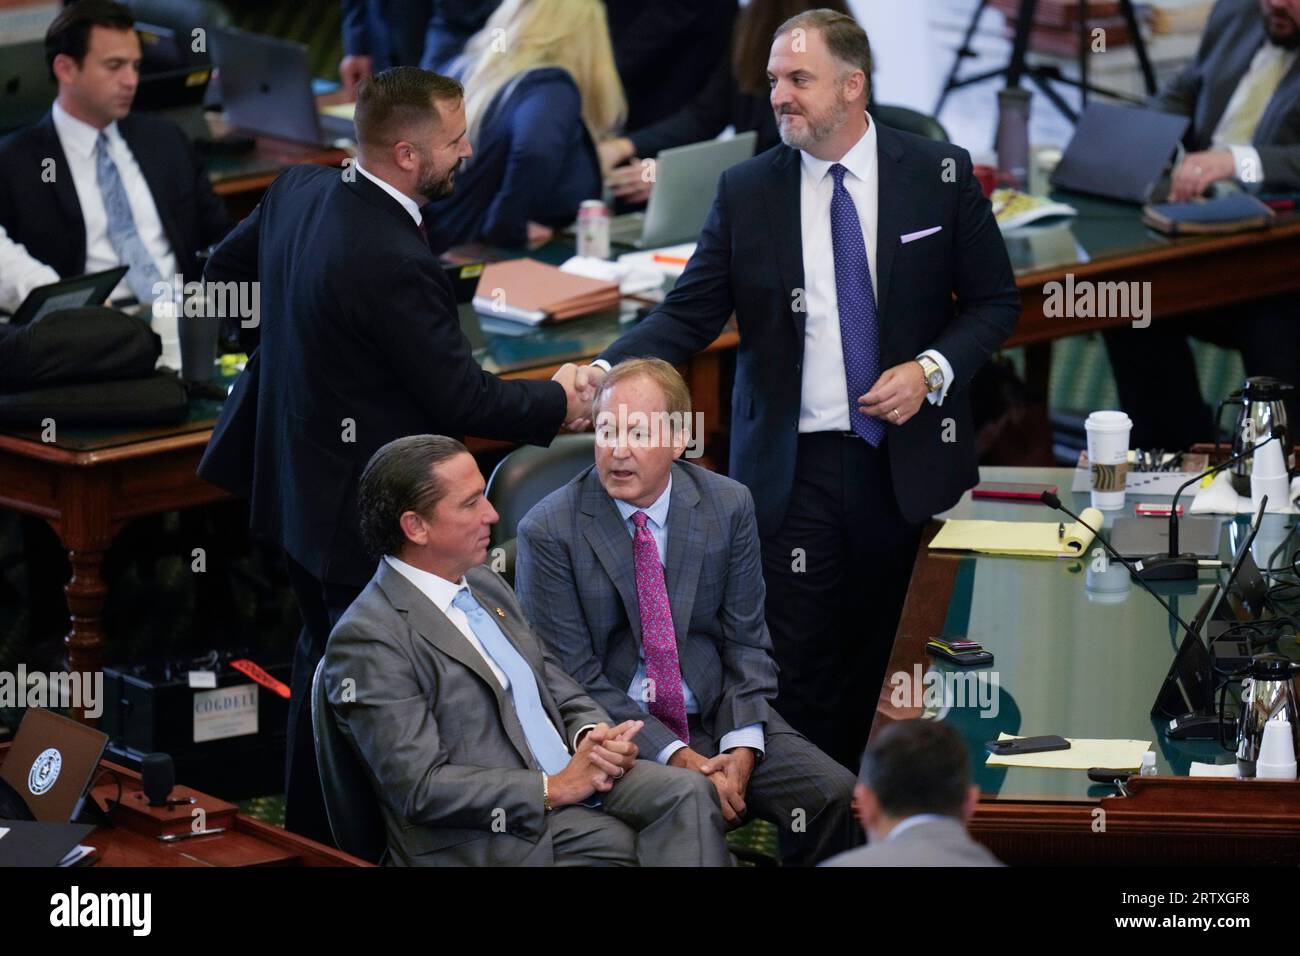 Austin Texas USA, September 15 2023: Suspended Texas attorney general KEN PAXTON(center) sits between defense attorneys TONY BUZBEE (left) and MITCH LITTLE (right) during Paxton's impeachment trial in the Texas Senate. The charges will go to the jury today. Credit: Bob Daemmrich/Alamy Live News Stock Photo